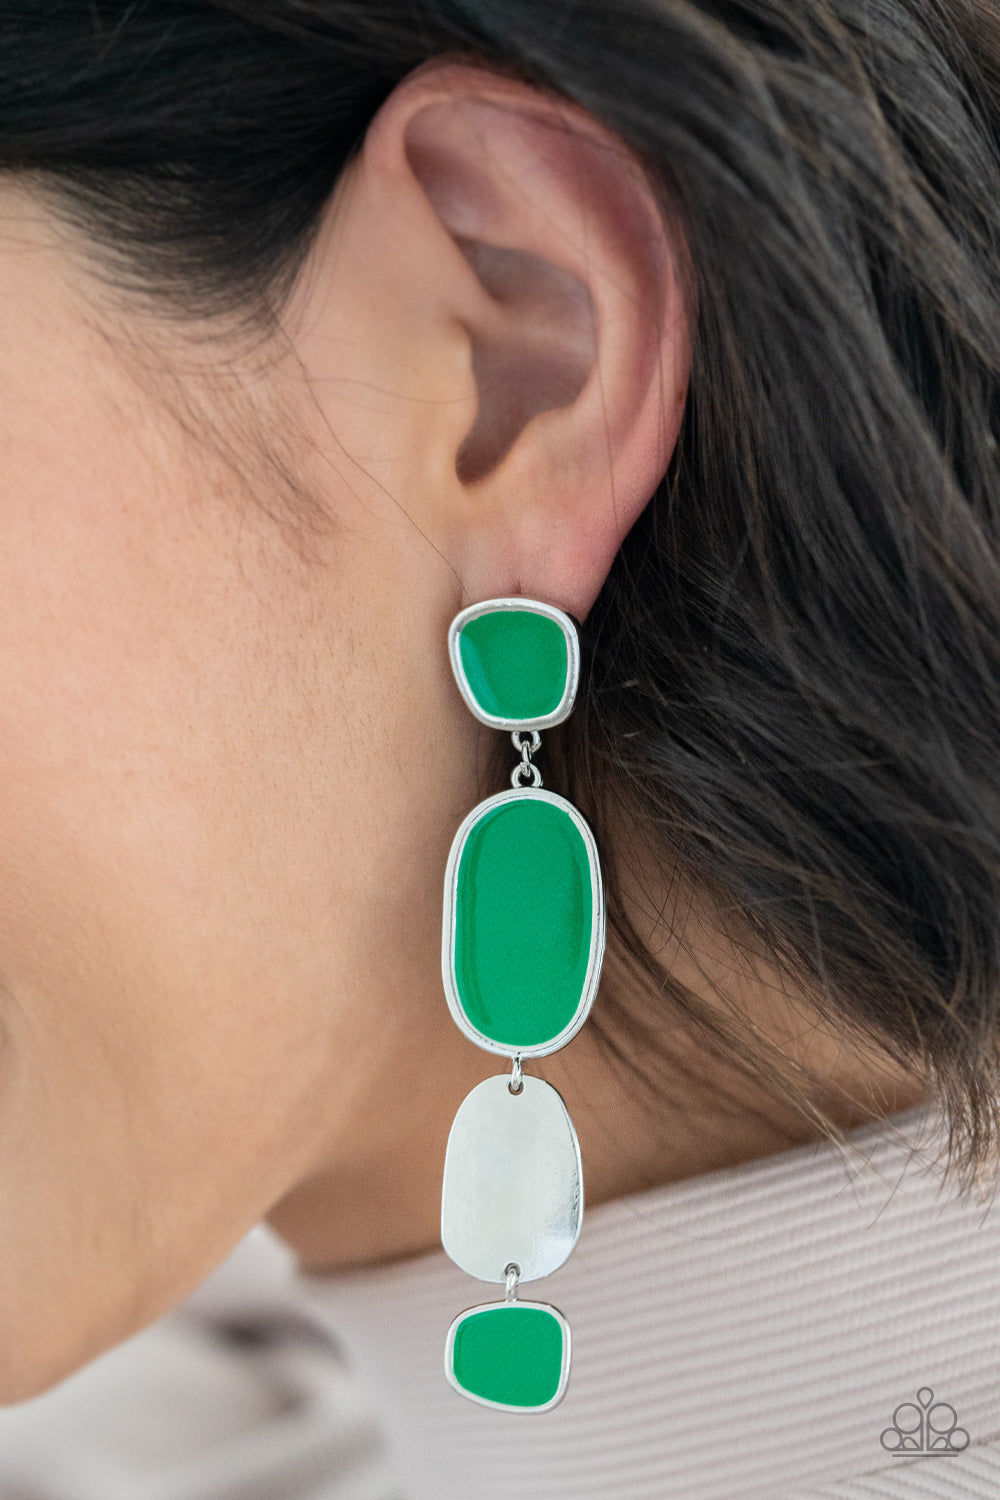 All Out Allure - Green Earrings painted in a shiny Mint finish, asymmetrical frames attach to a single silver frame, creating an abstract lure. Earring attaches to a standard post fitting.  Sold as one pair of post earrings.  Paparazzi Jewelry is lead and nickel free so it's perfect for sensitive skin too!